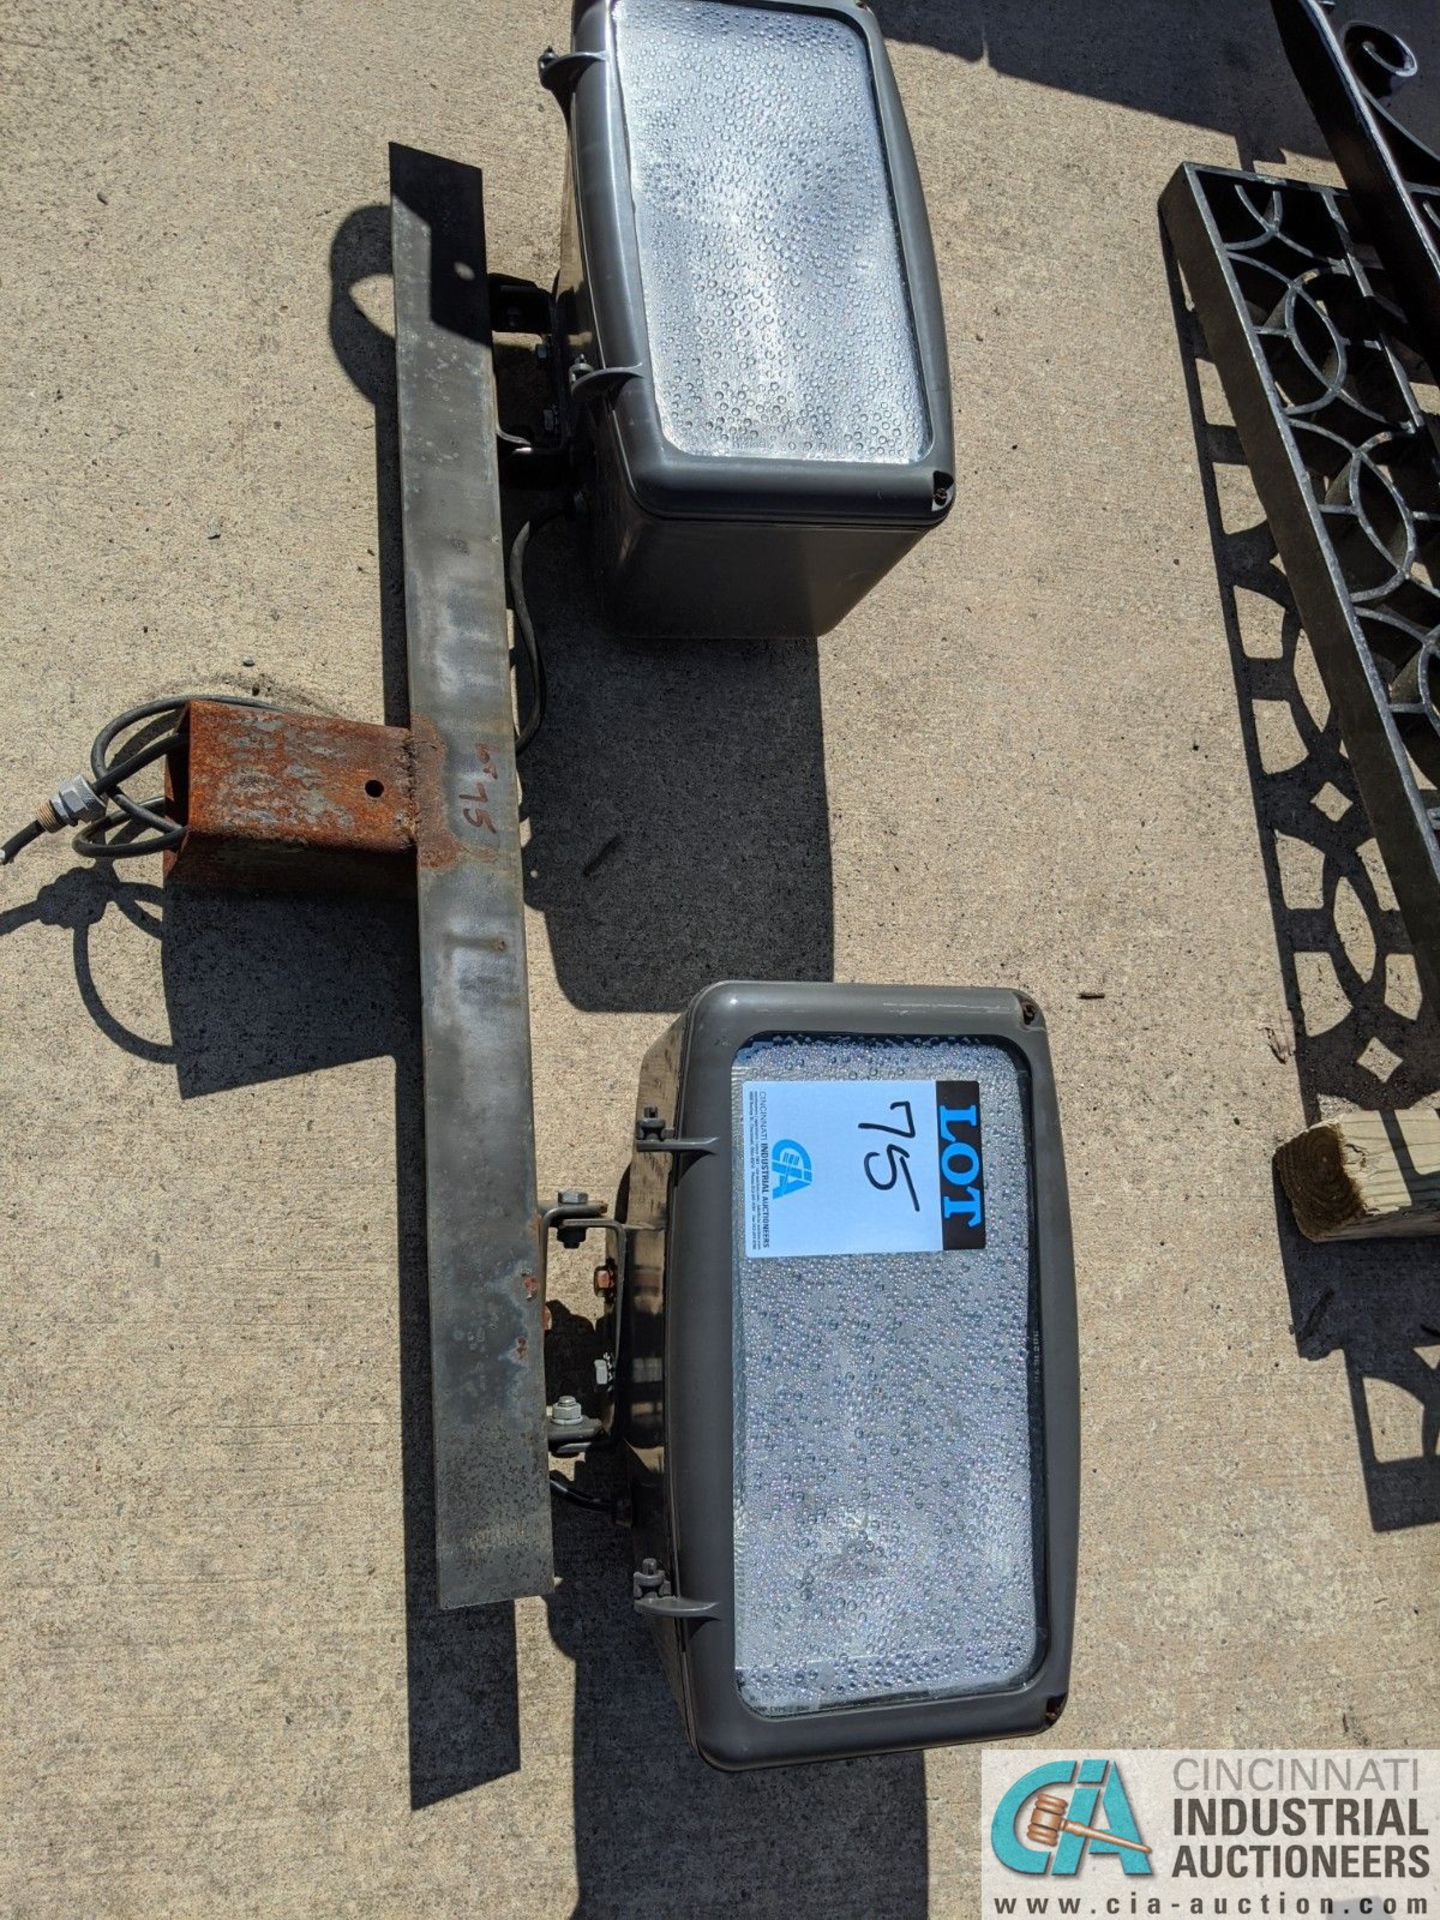 DUAL LIGHT STAND (220 Blackbrook Rd., Painsville, OH 44077 - Greg Papis: 440-537-5127)